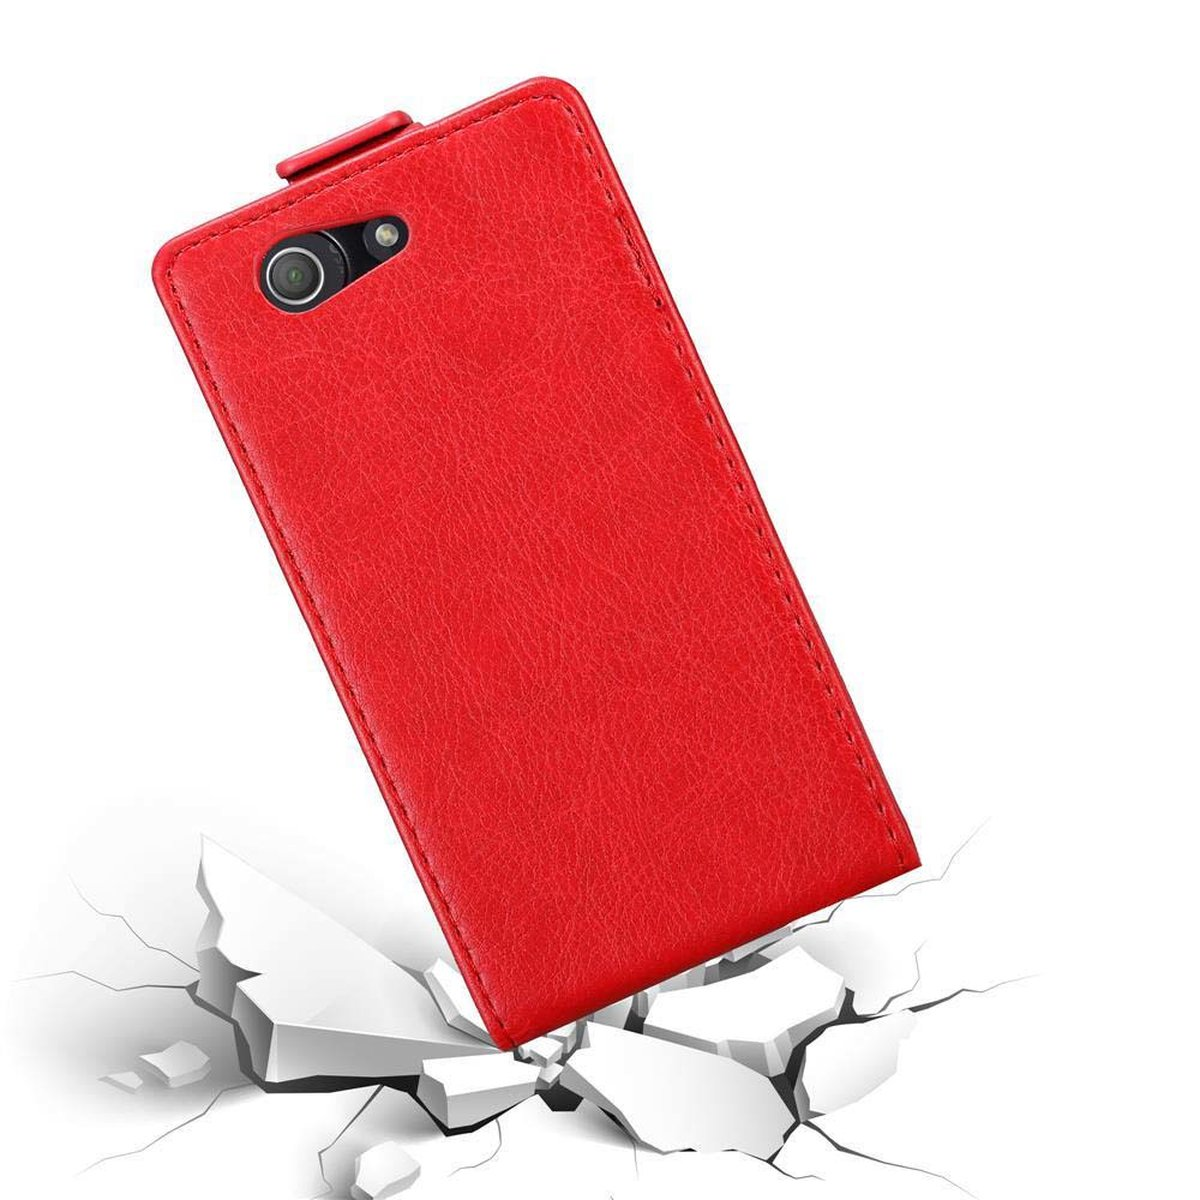 Sony, Xperia CADORABO Flip Hülle COMPACT, Style, Z3 ROT im APFEL Cover, Flip